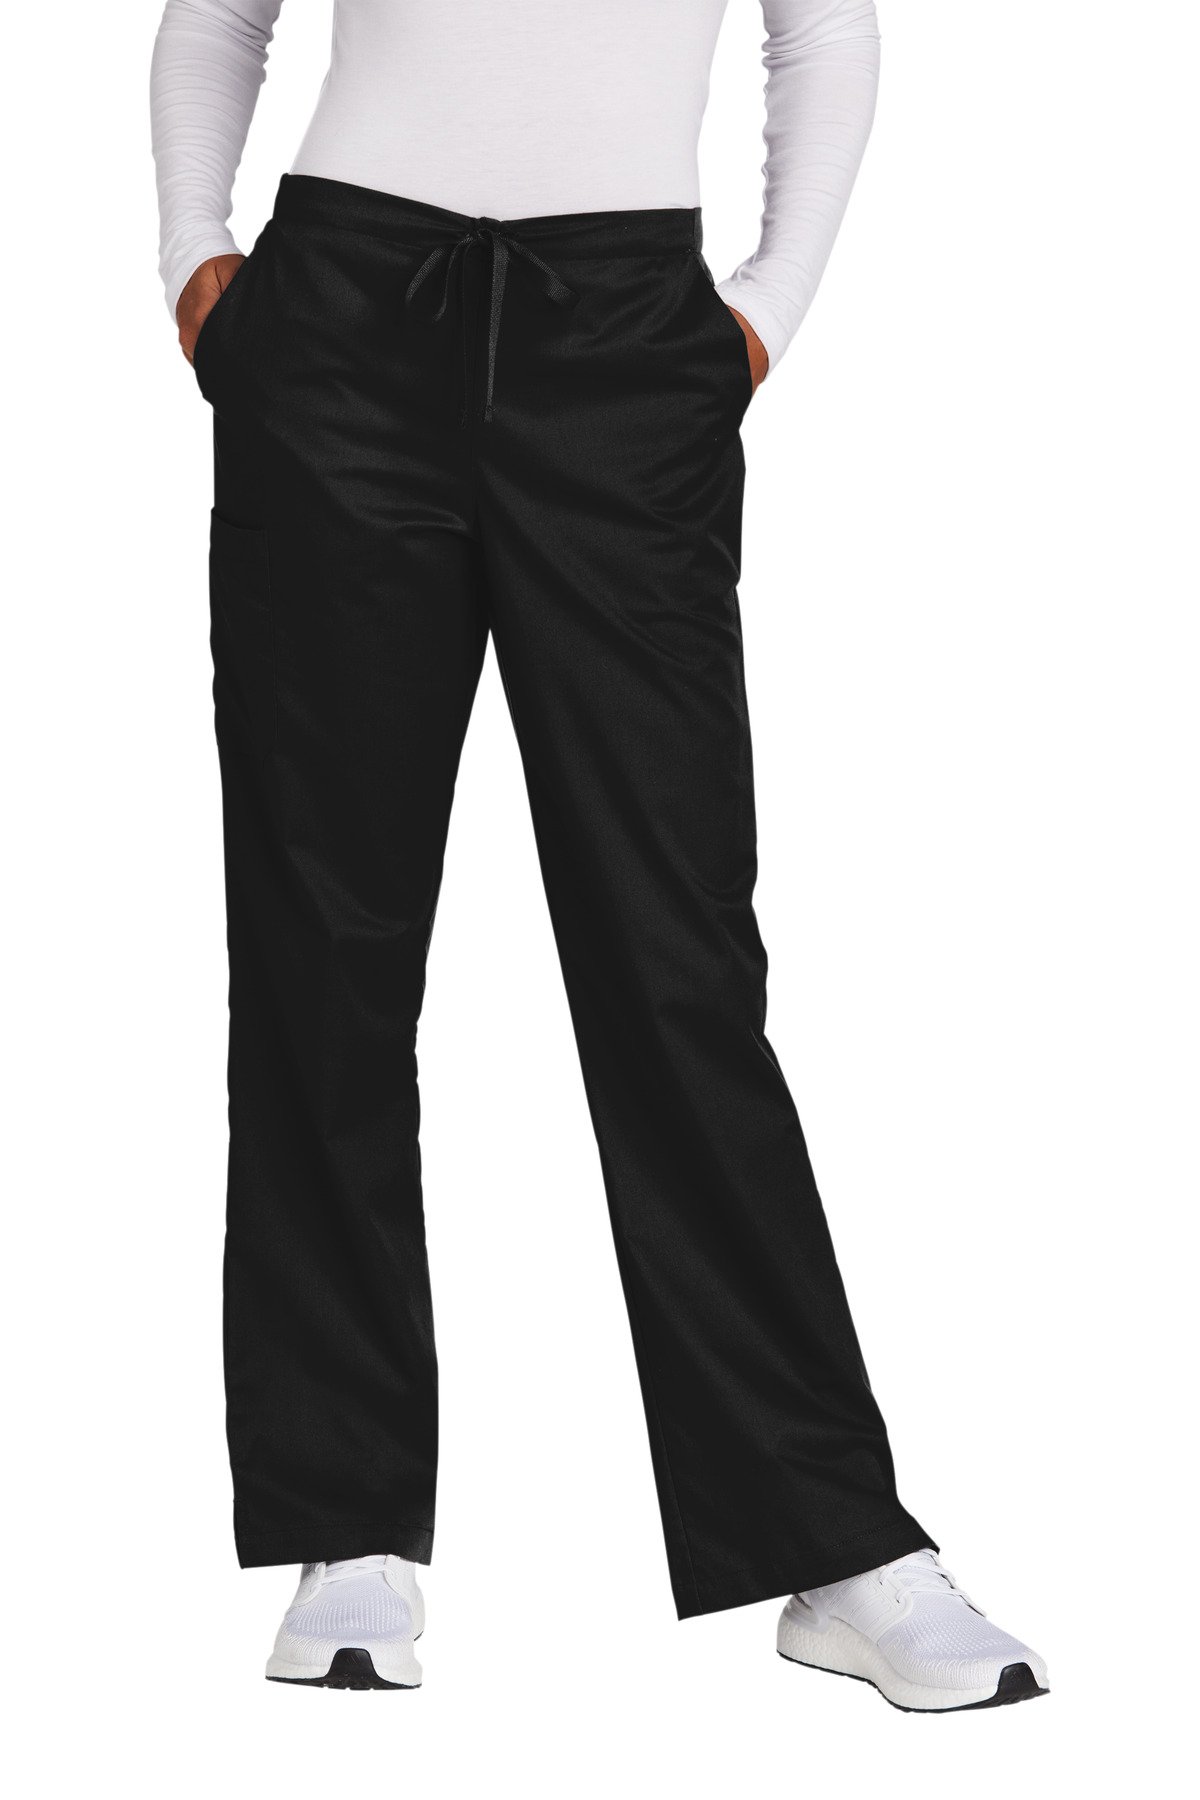 Front view of Wink Women’s WorkFlex Flare Leg Cargo Pant